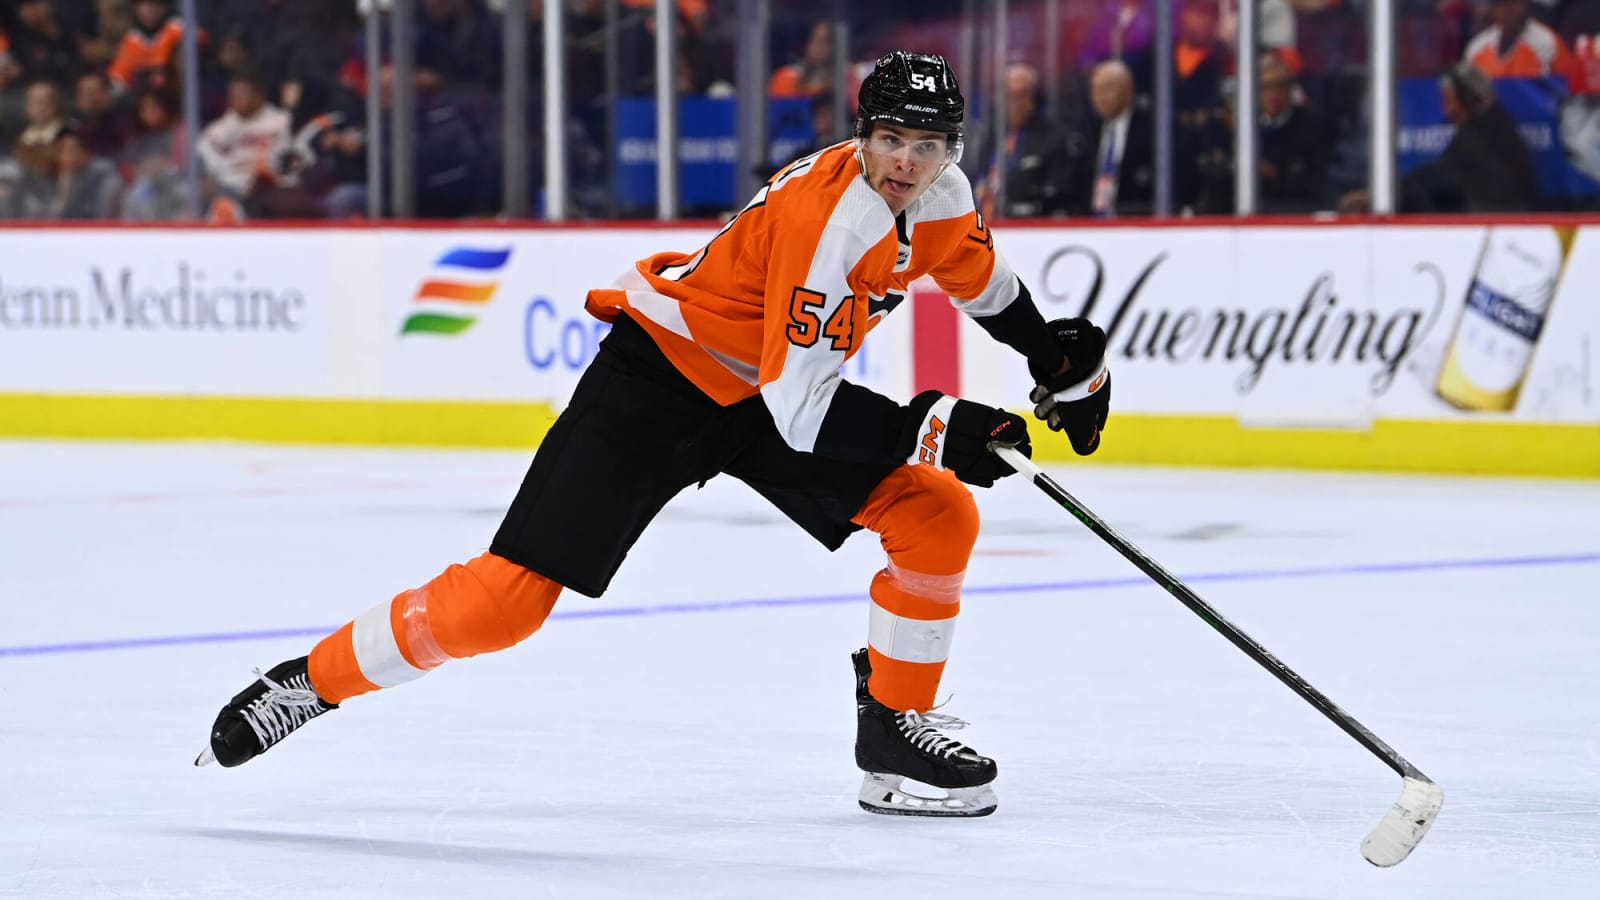 Zamula, Flyers agree to a one-year extension